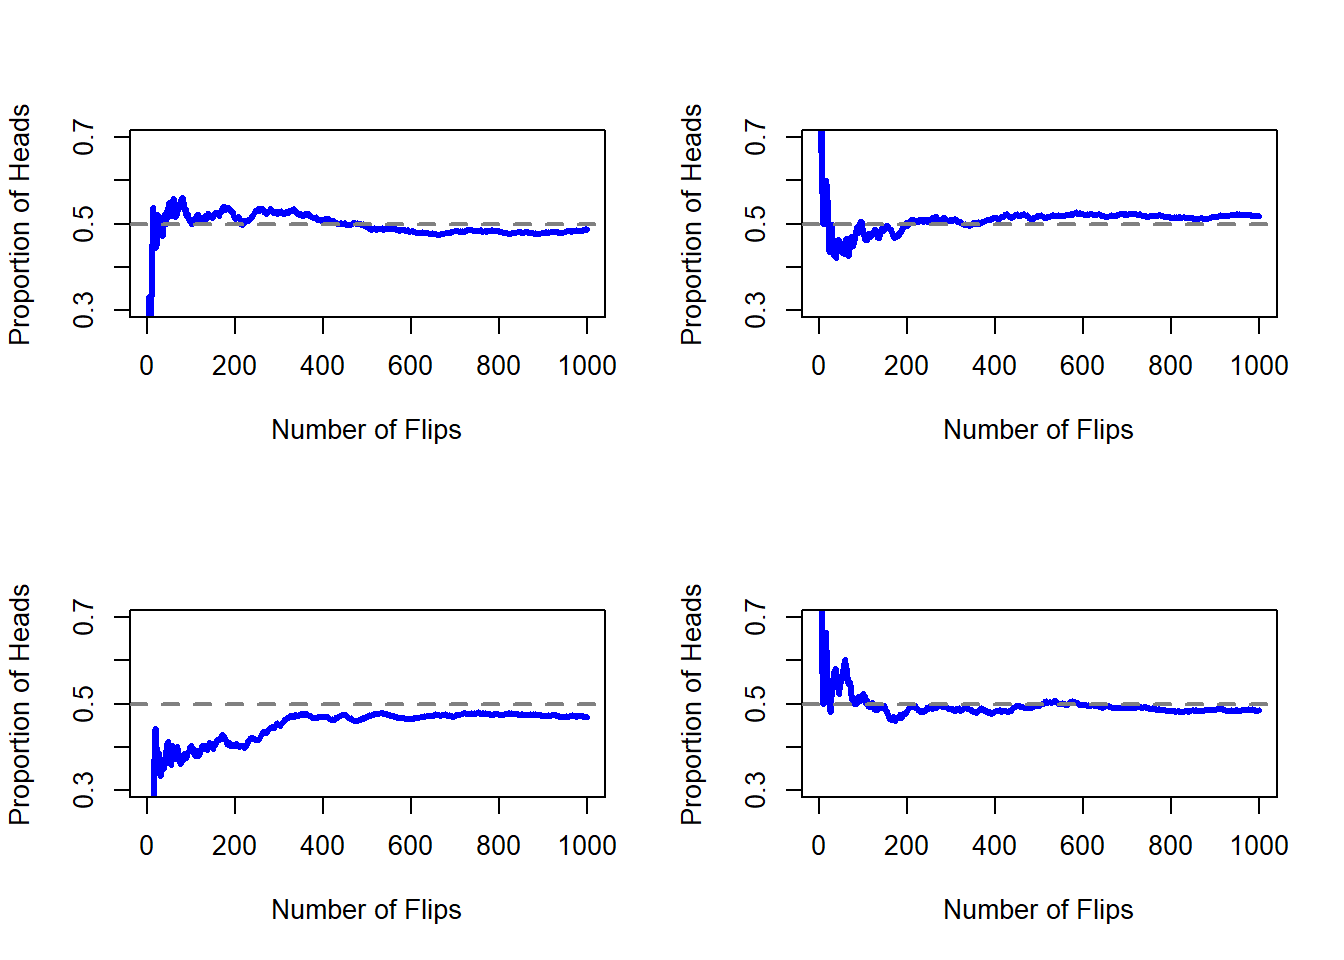 An illustration of how frequentist probability works. If you flip a fair coin over and over again, the proportion of heads that you've seen eventually settles down, and converges to the true probability of 0.5. Each panel shows four different simulated experiments: in each case, we pretend we flipped a coin 1000 times, and kept track of the proportion of flips that were heads as we went along. Although none of these sequences actually ended up with an exact value of .5, if we'd extended the experiment for an infinite number of coin flips they would have.